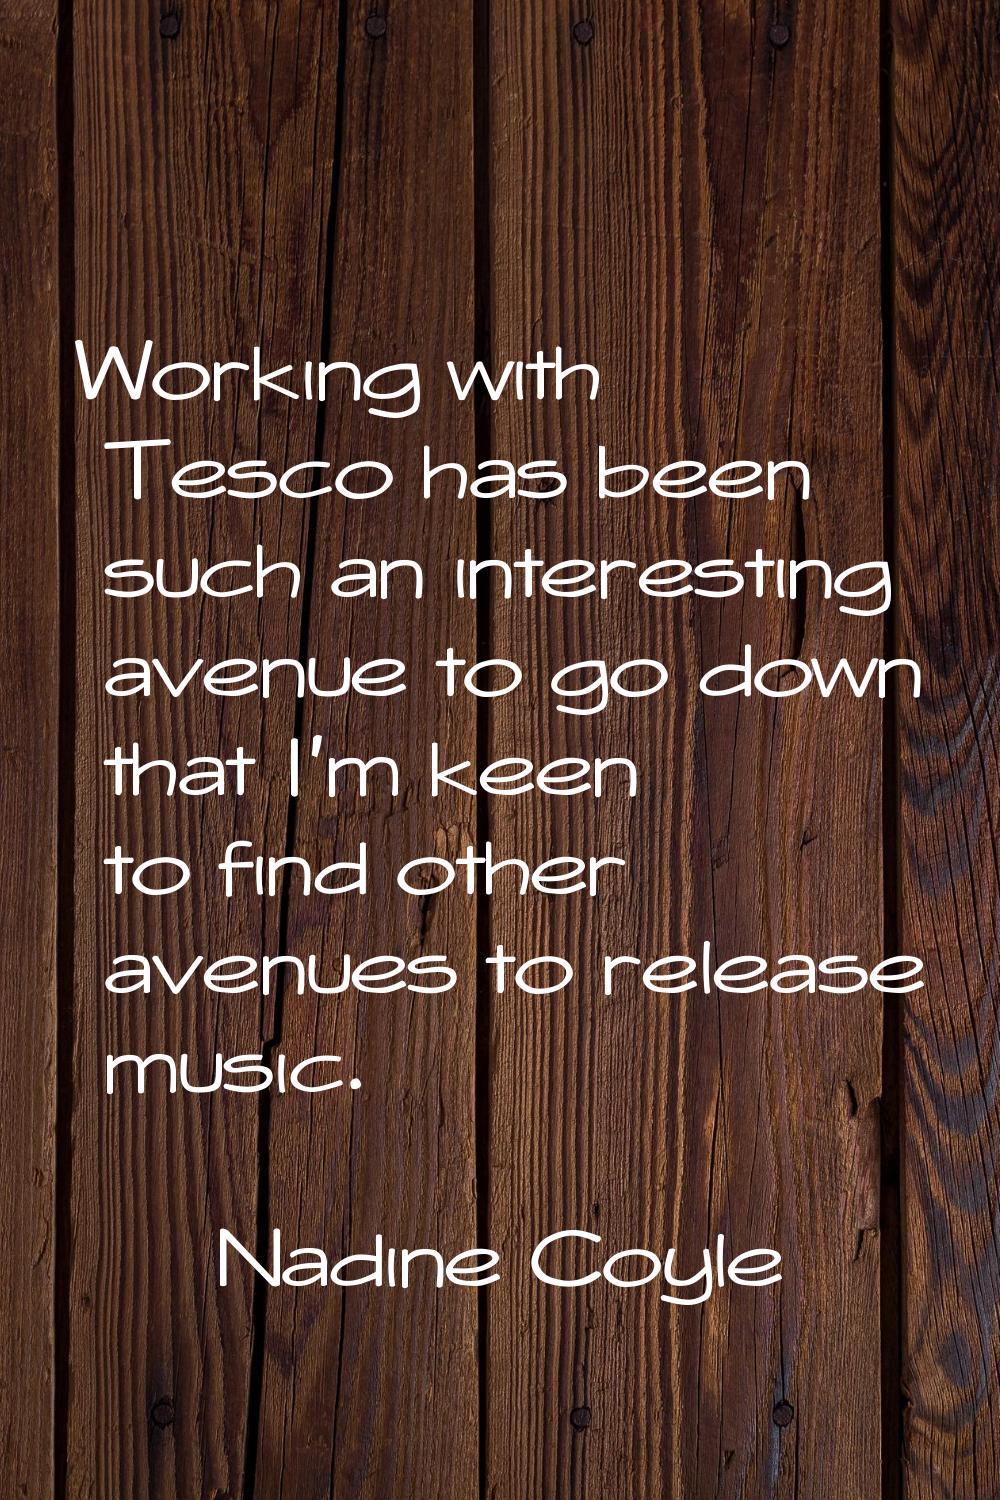 Working with Tesco has been such an interesting avenue to go down that I'm keen to find other avenu